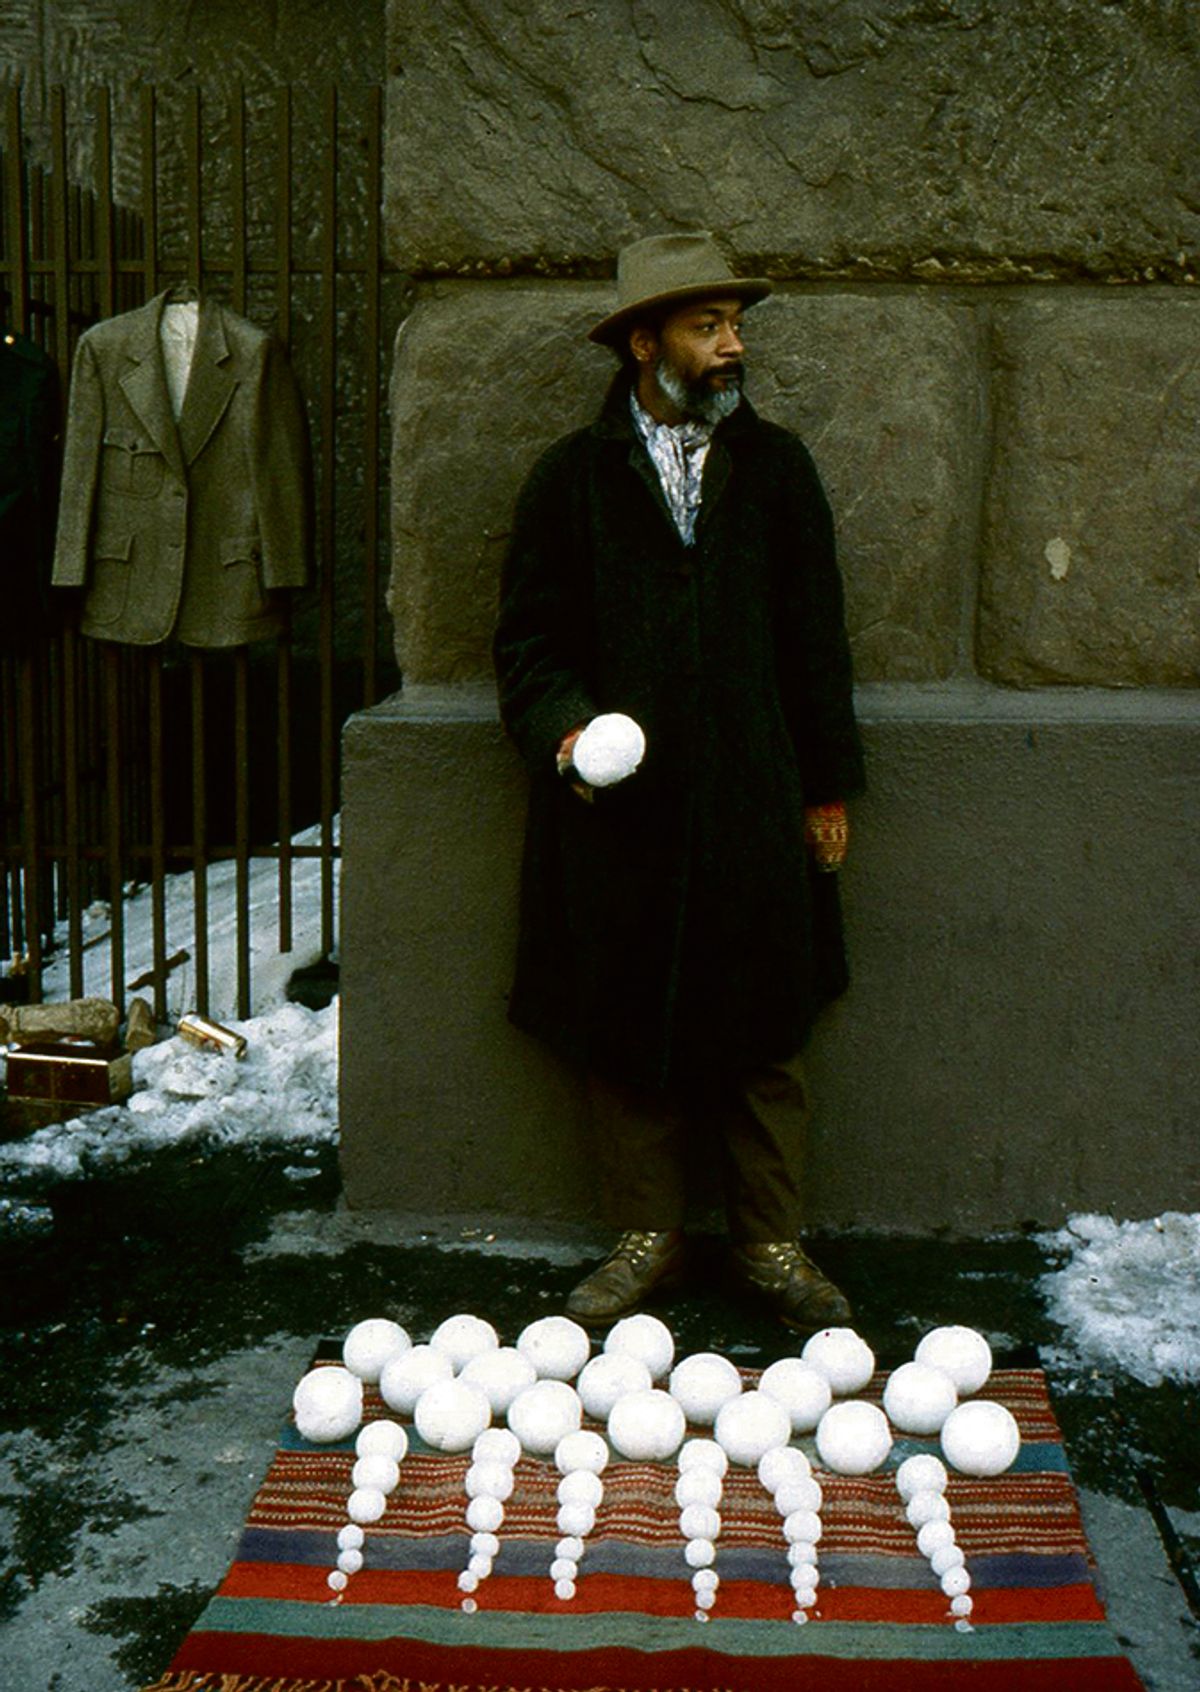 Selling snow in winter: The Melt Goes On Forever starts off with Dawoud Bey’s photographs of Hammons performing his work Bliz-aard Ball Sale (1983)

Performance: © the artist; Photo: Dawoud Bey